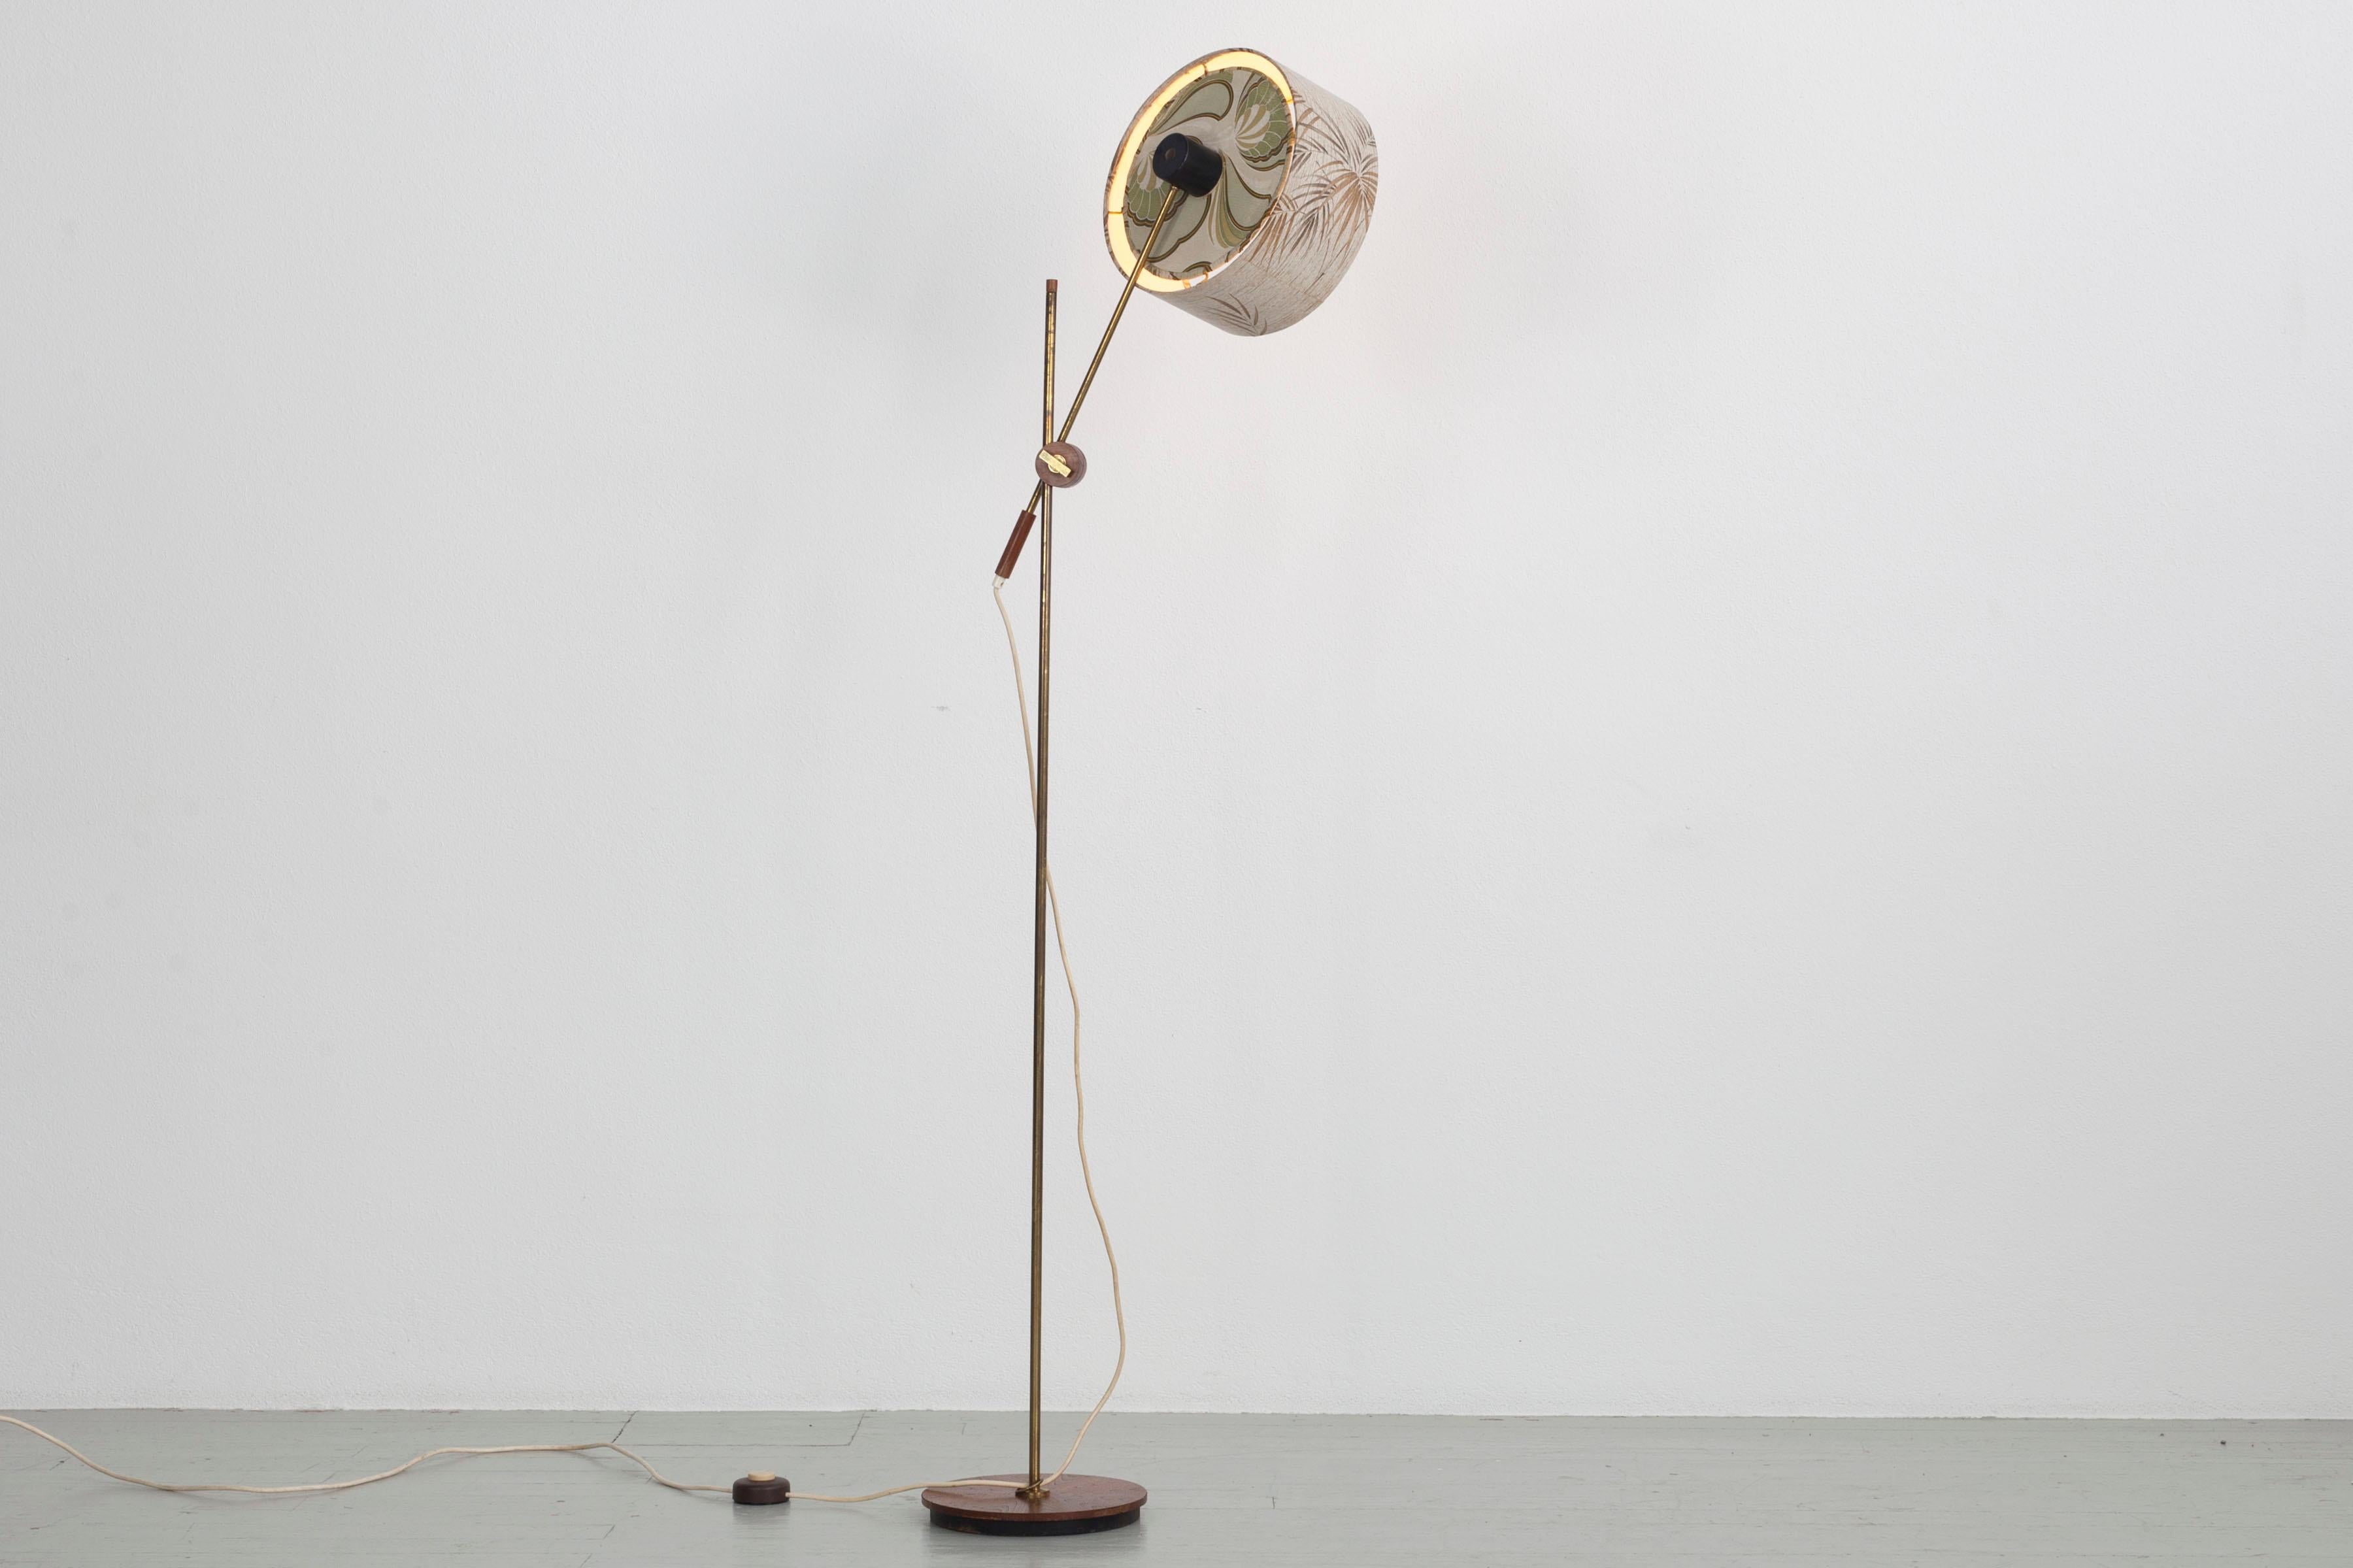 60s Floor lamp with adjustable height and position lampshade. The lampshade is covered with patterned paper inside and outside. The lamp base is made of teak and frame of brass. The lamp has an E27 socket. It is 143cm high and the diameter of the